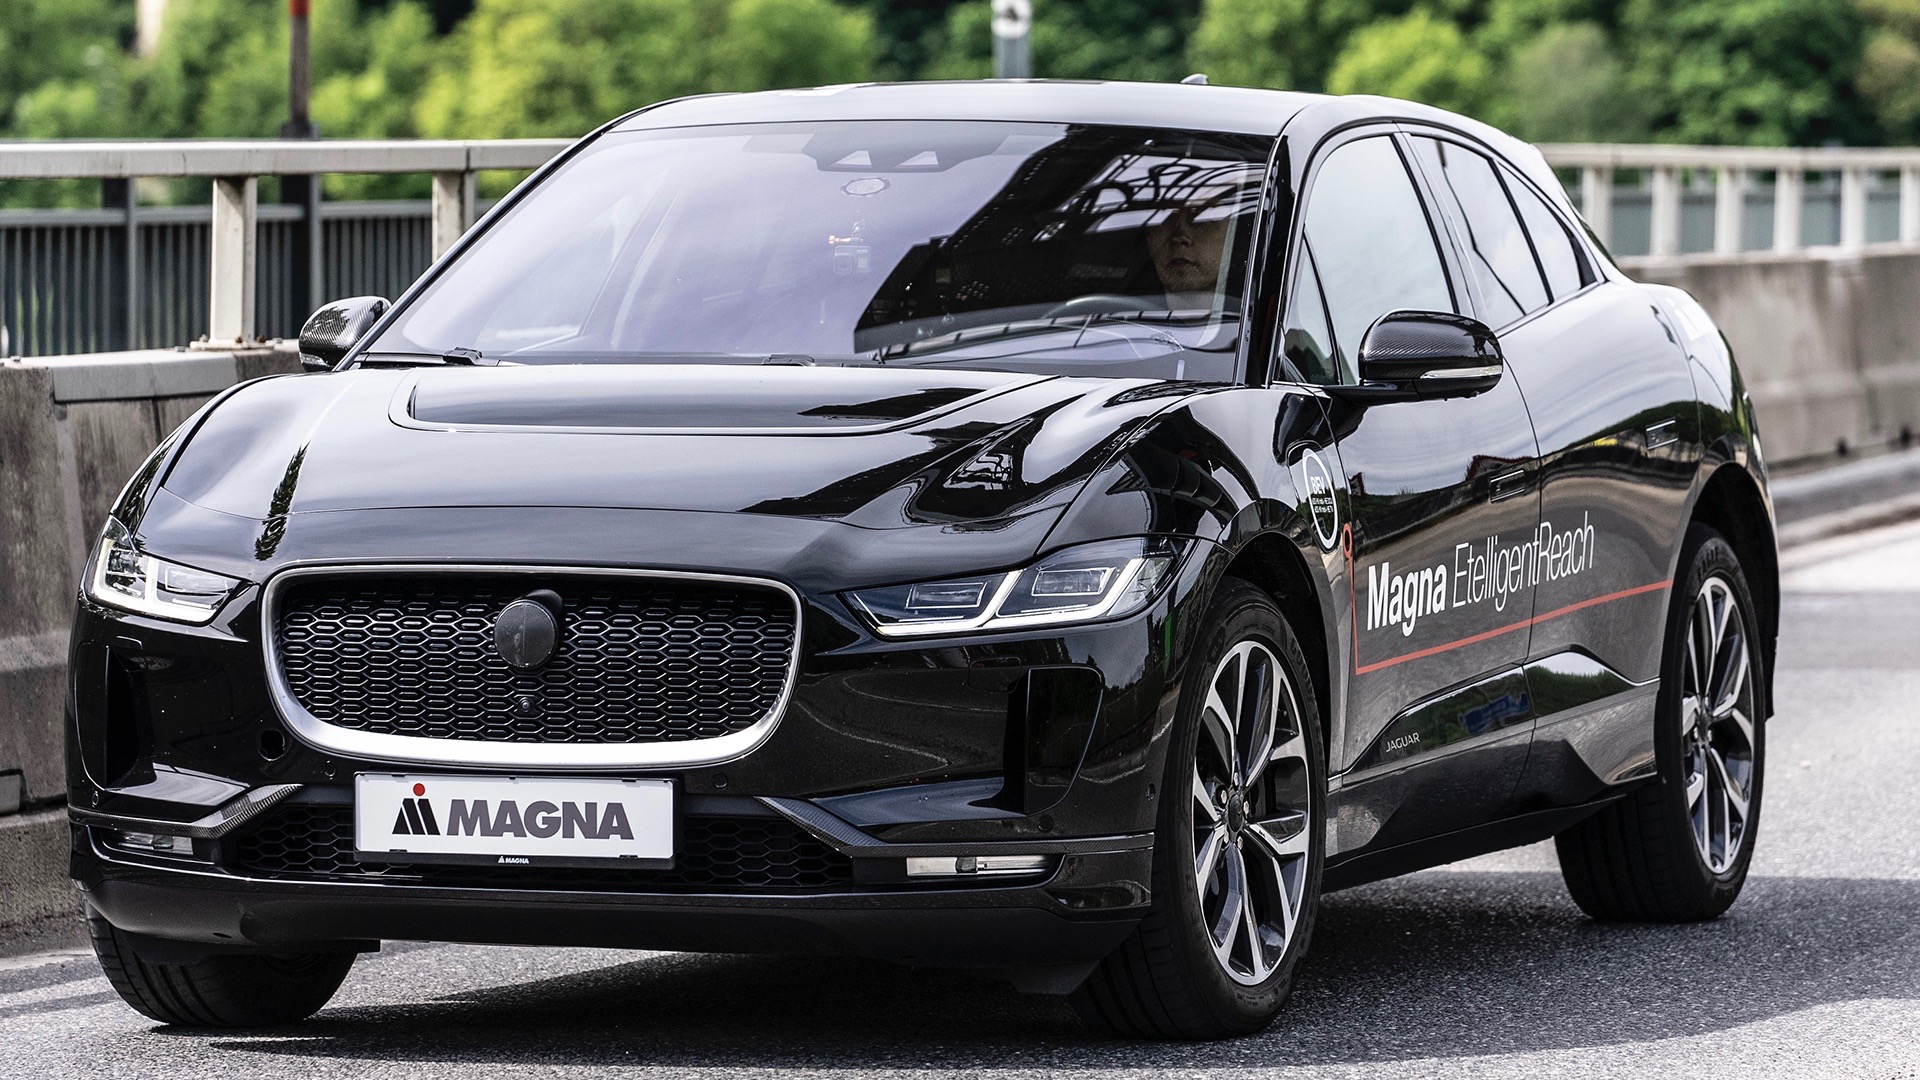 Magna claims it can boost EV range 30%, with software and controls a big part of itMagna claims it can boost EV range 30%, with software and controls a big part of it